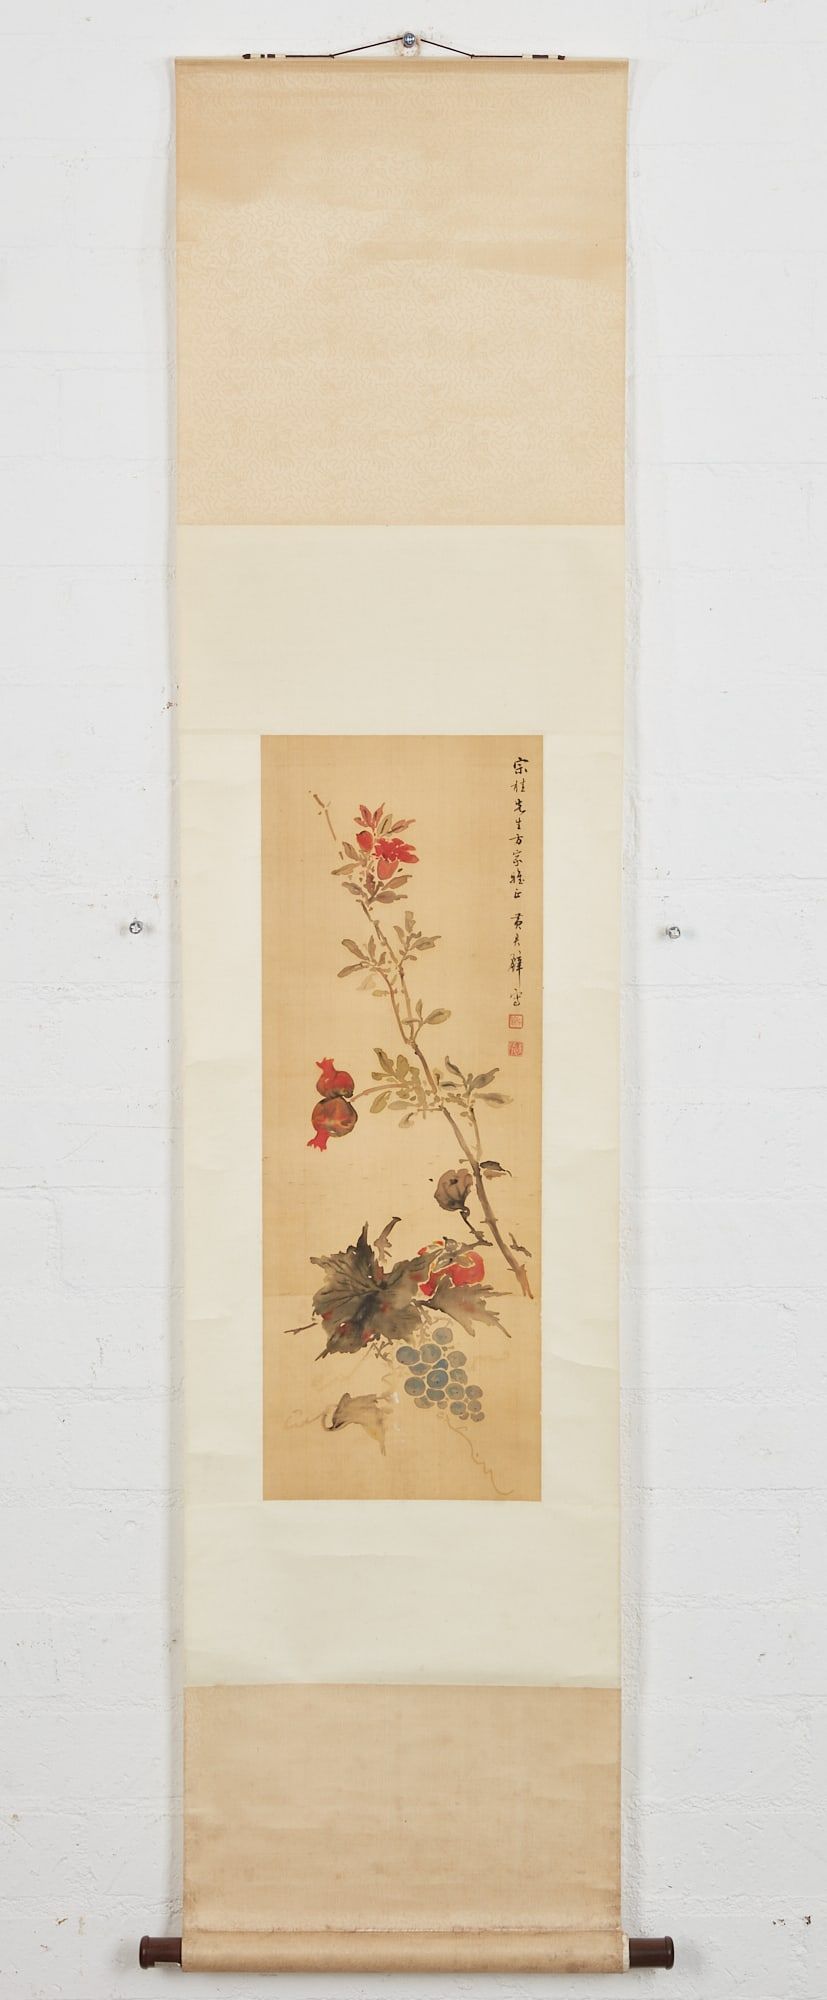 A CHINESE FLORAL AND FRUIT HANGING